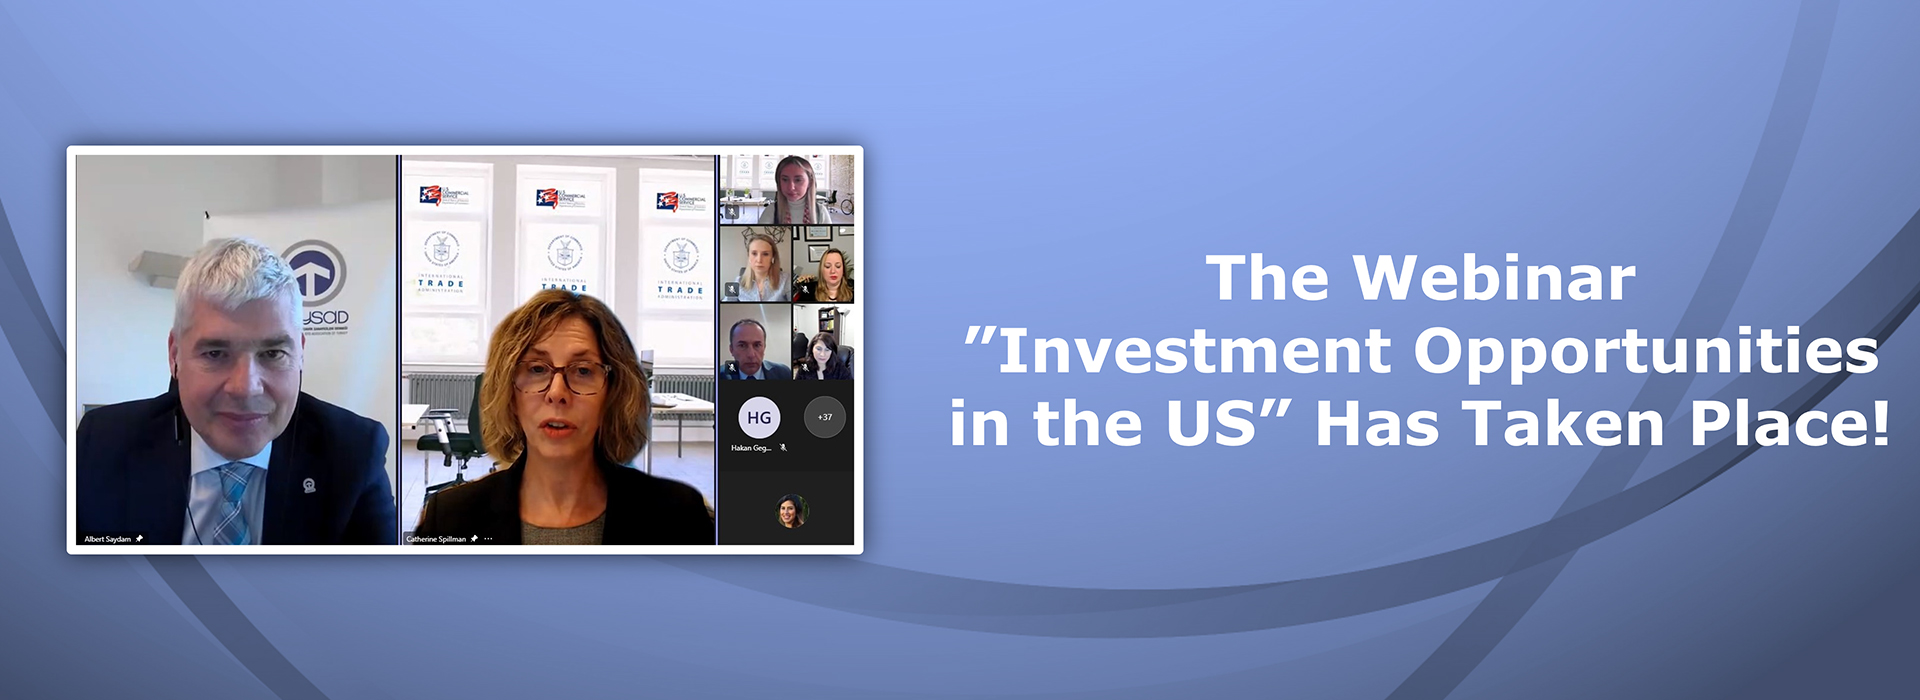 USA Investment webinar was held.